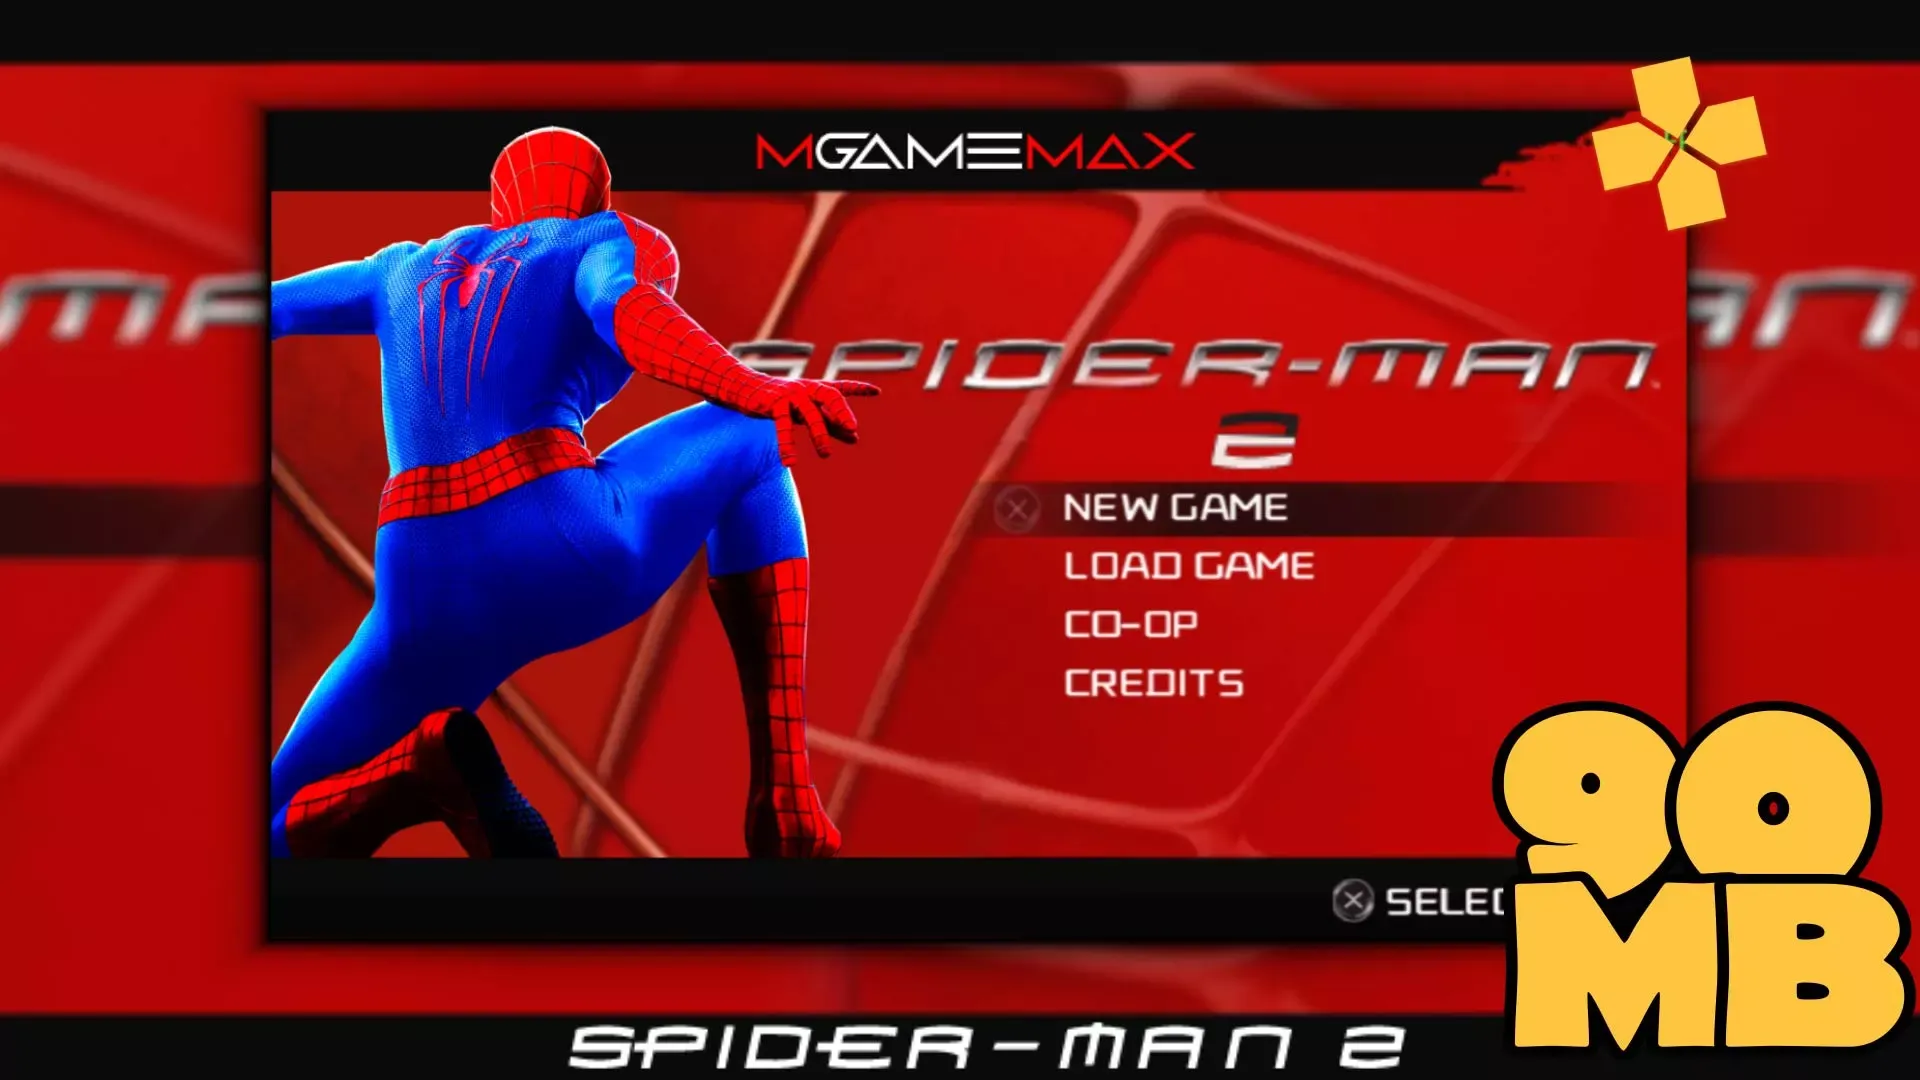 [120MB] SPIDER-MAN 2 ISO - ANDROID PPSSPP Highly Compressed PSP ISO